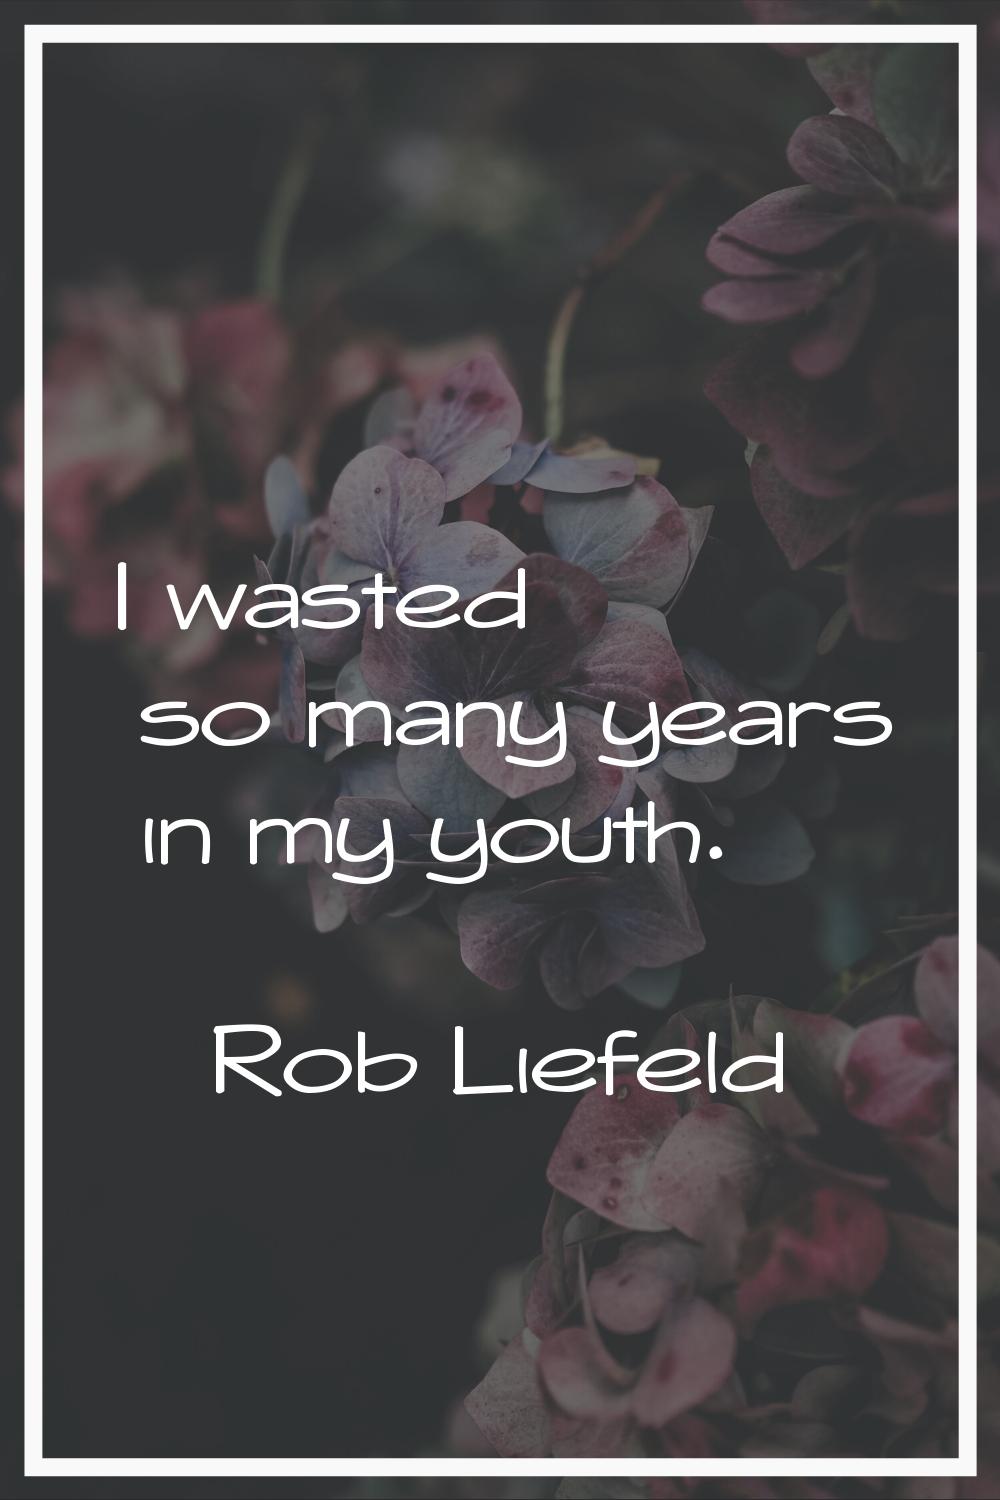 I wasted so many years in my youth.